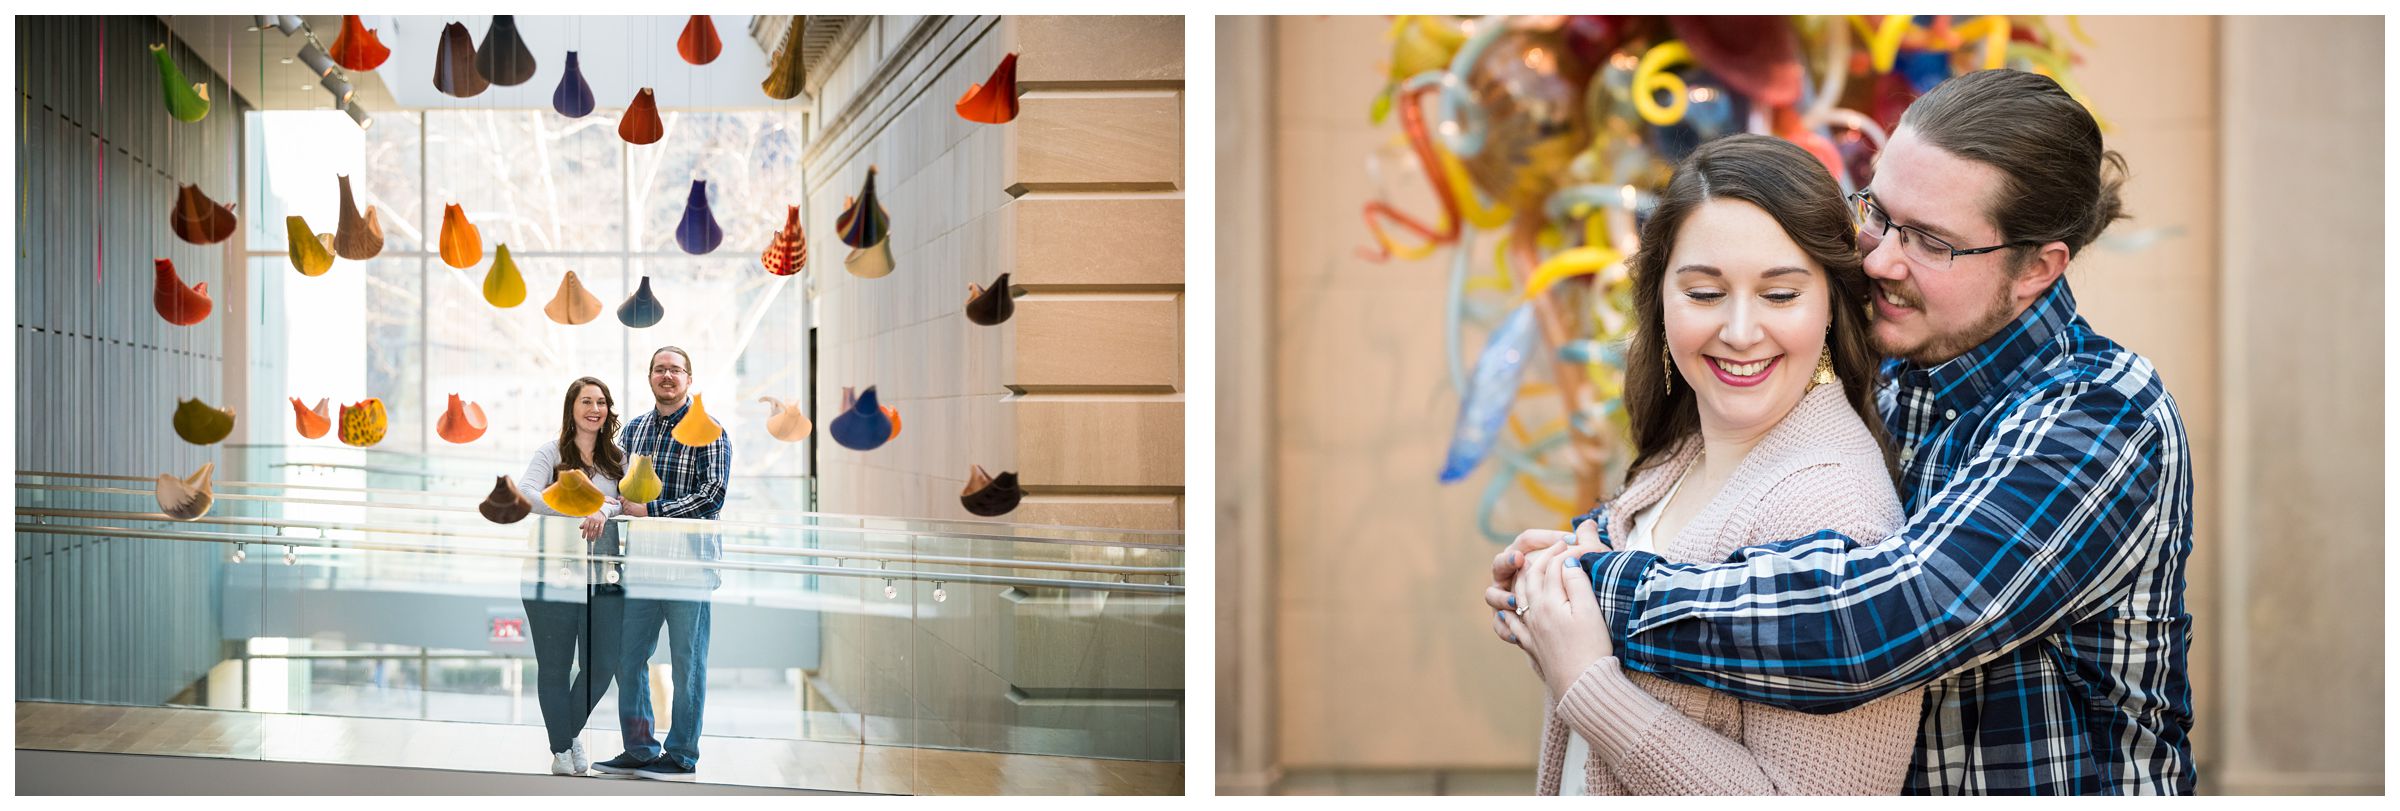 Engagement photo session in front of colorful glass Chihuly sculptures at the Columbus Museum of Art